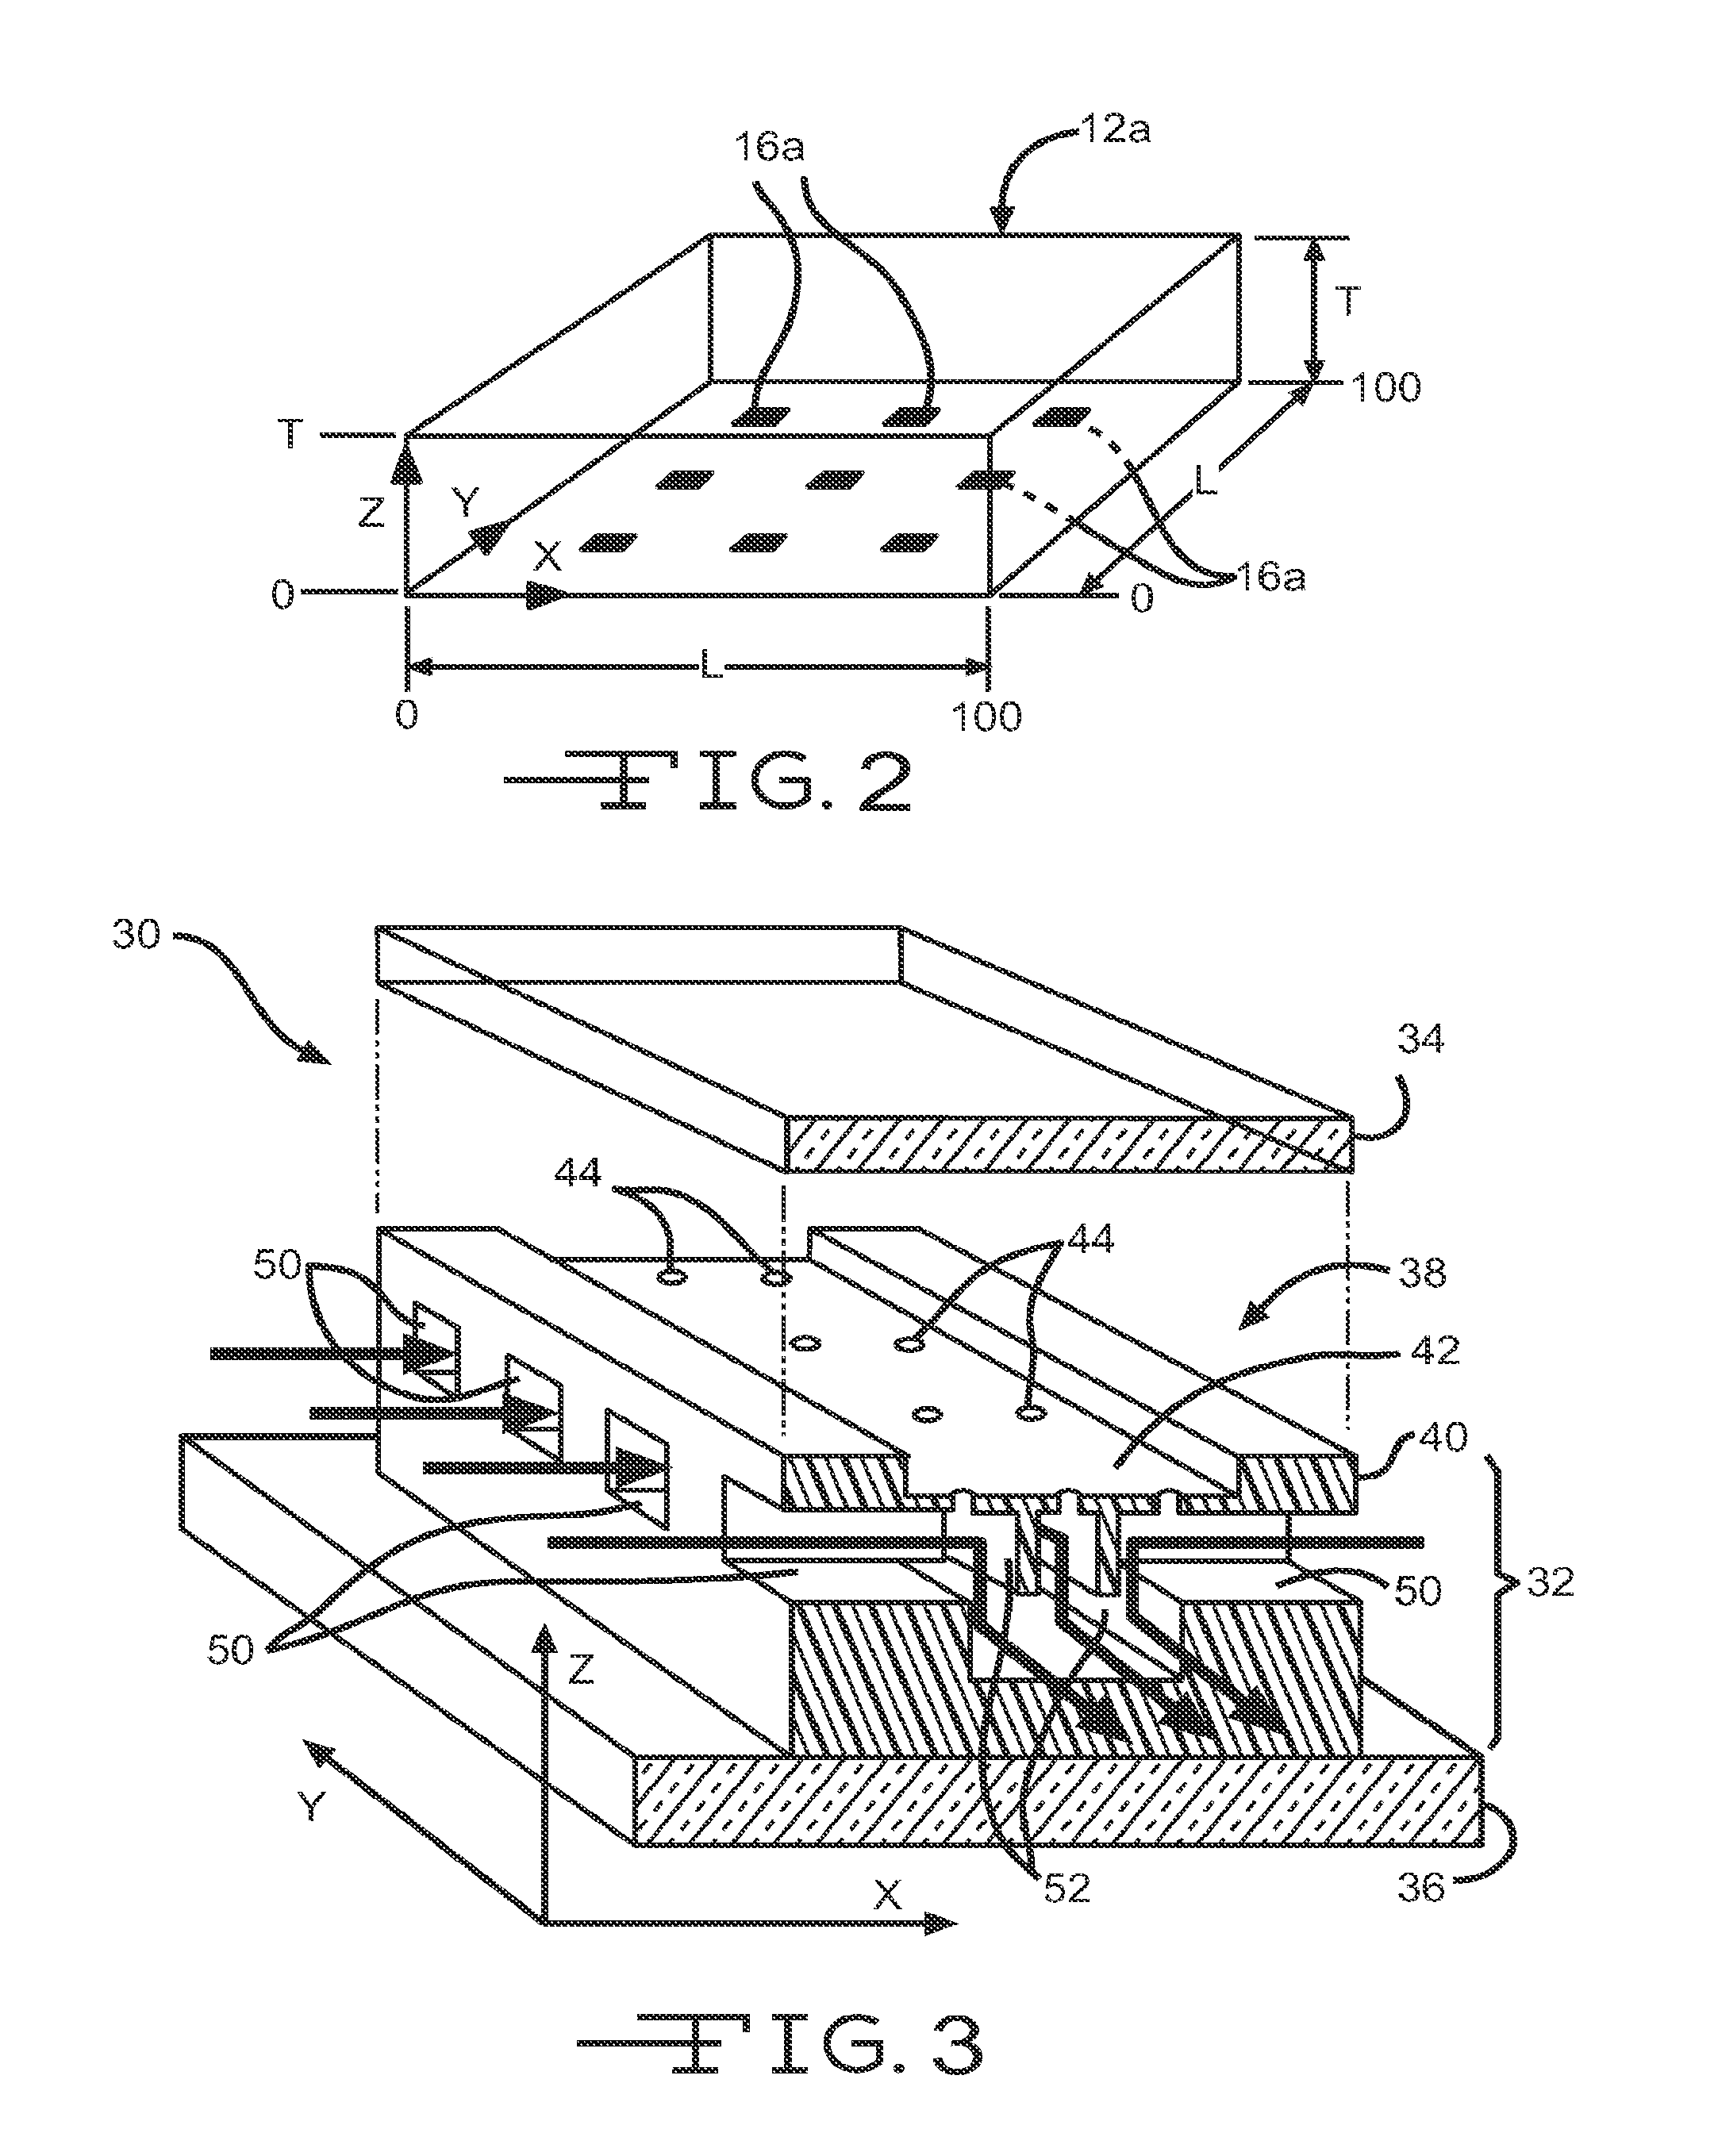 Microfluidic device and related methods